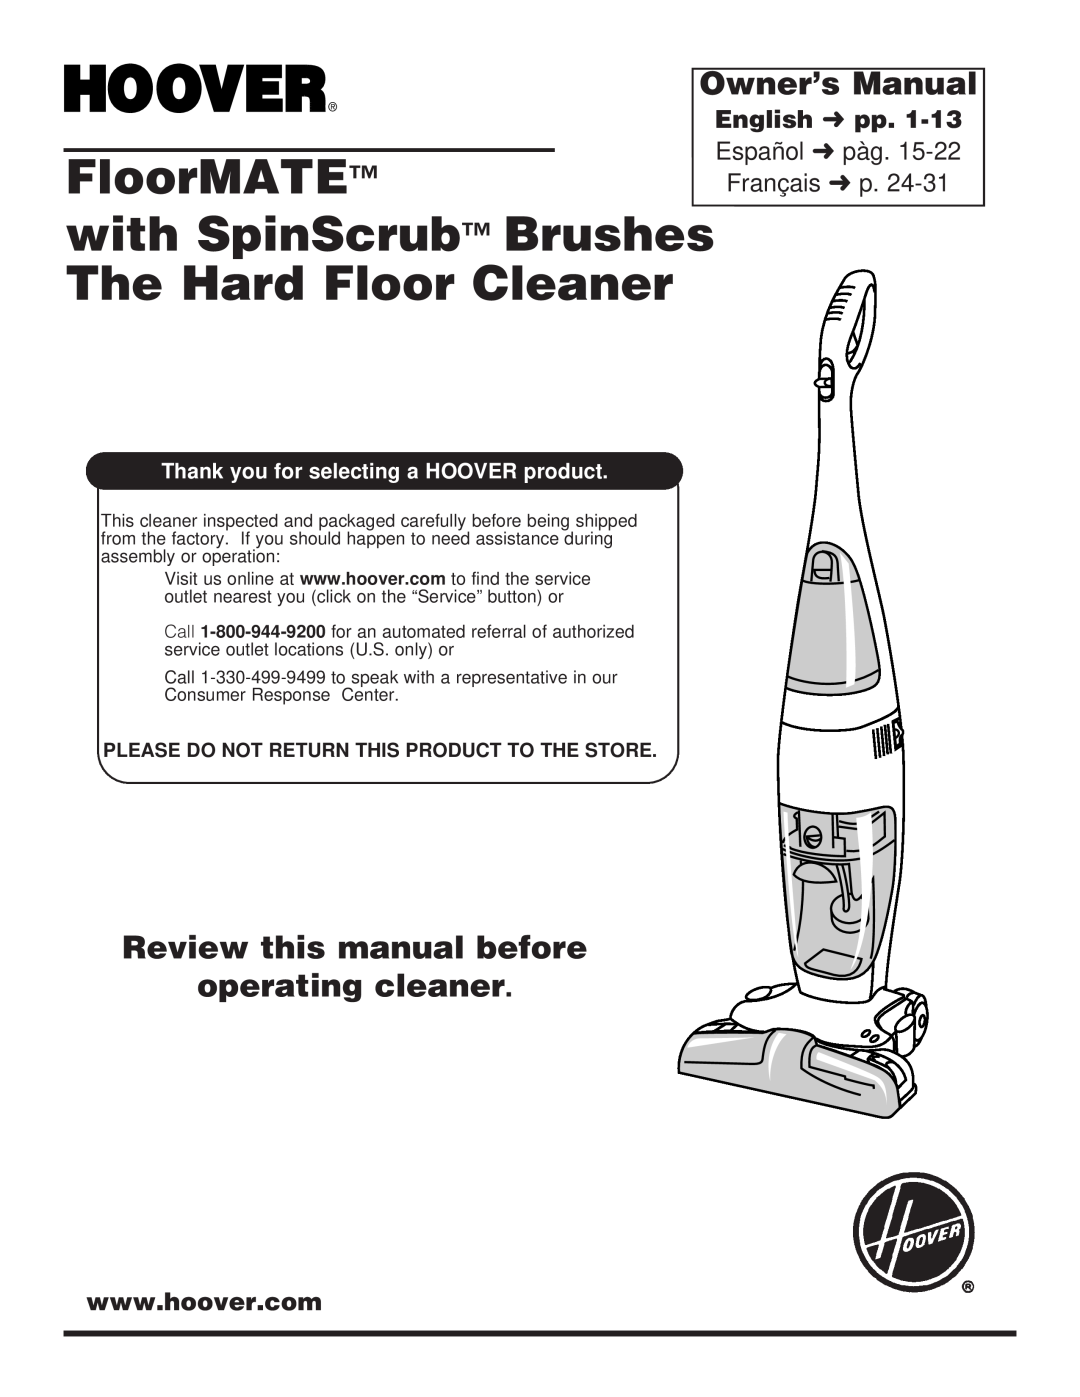 Hoover Floor Mate with Spin Scrub Brushes The Hard Floor Cleaner owner manual Owner’s Manual, FloorMATE 